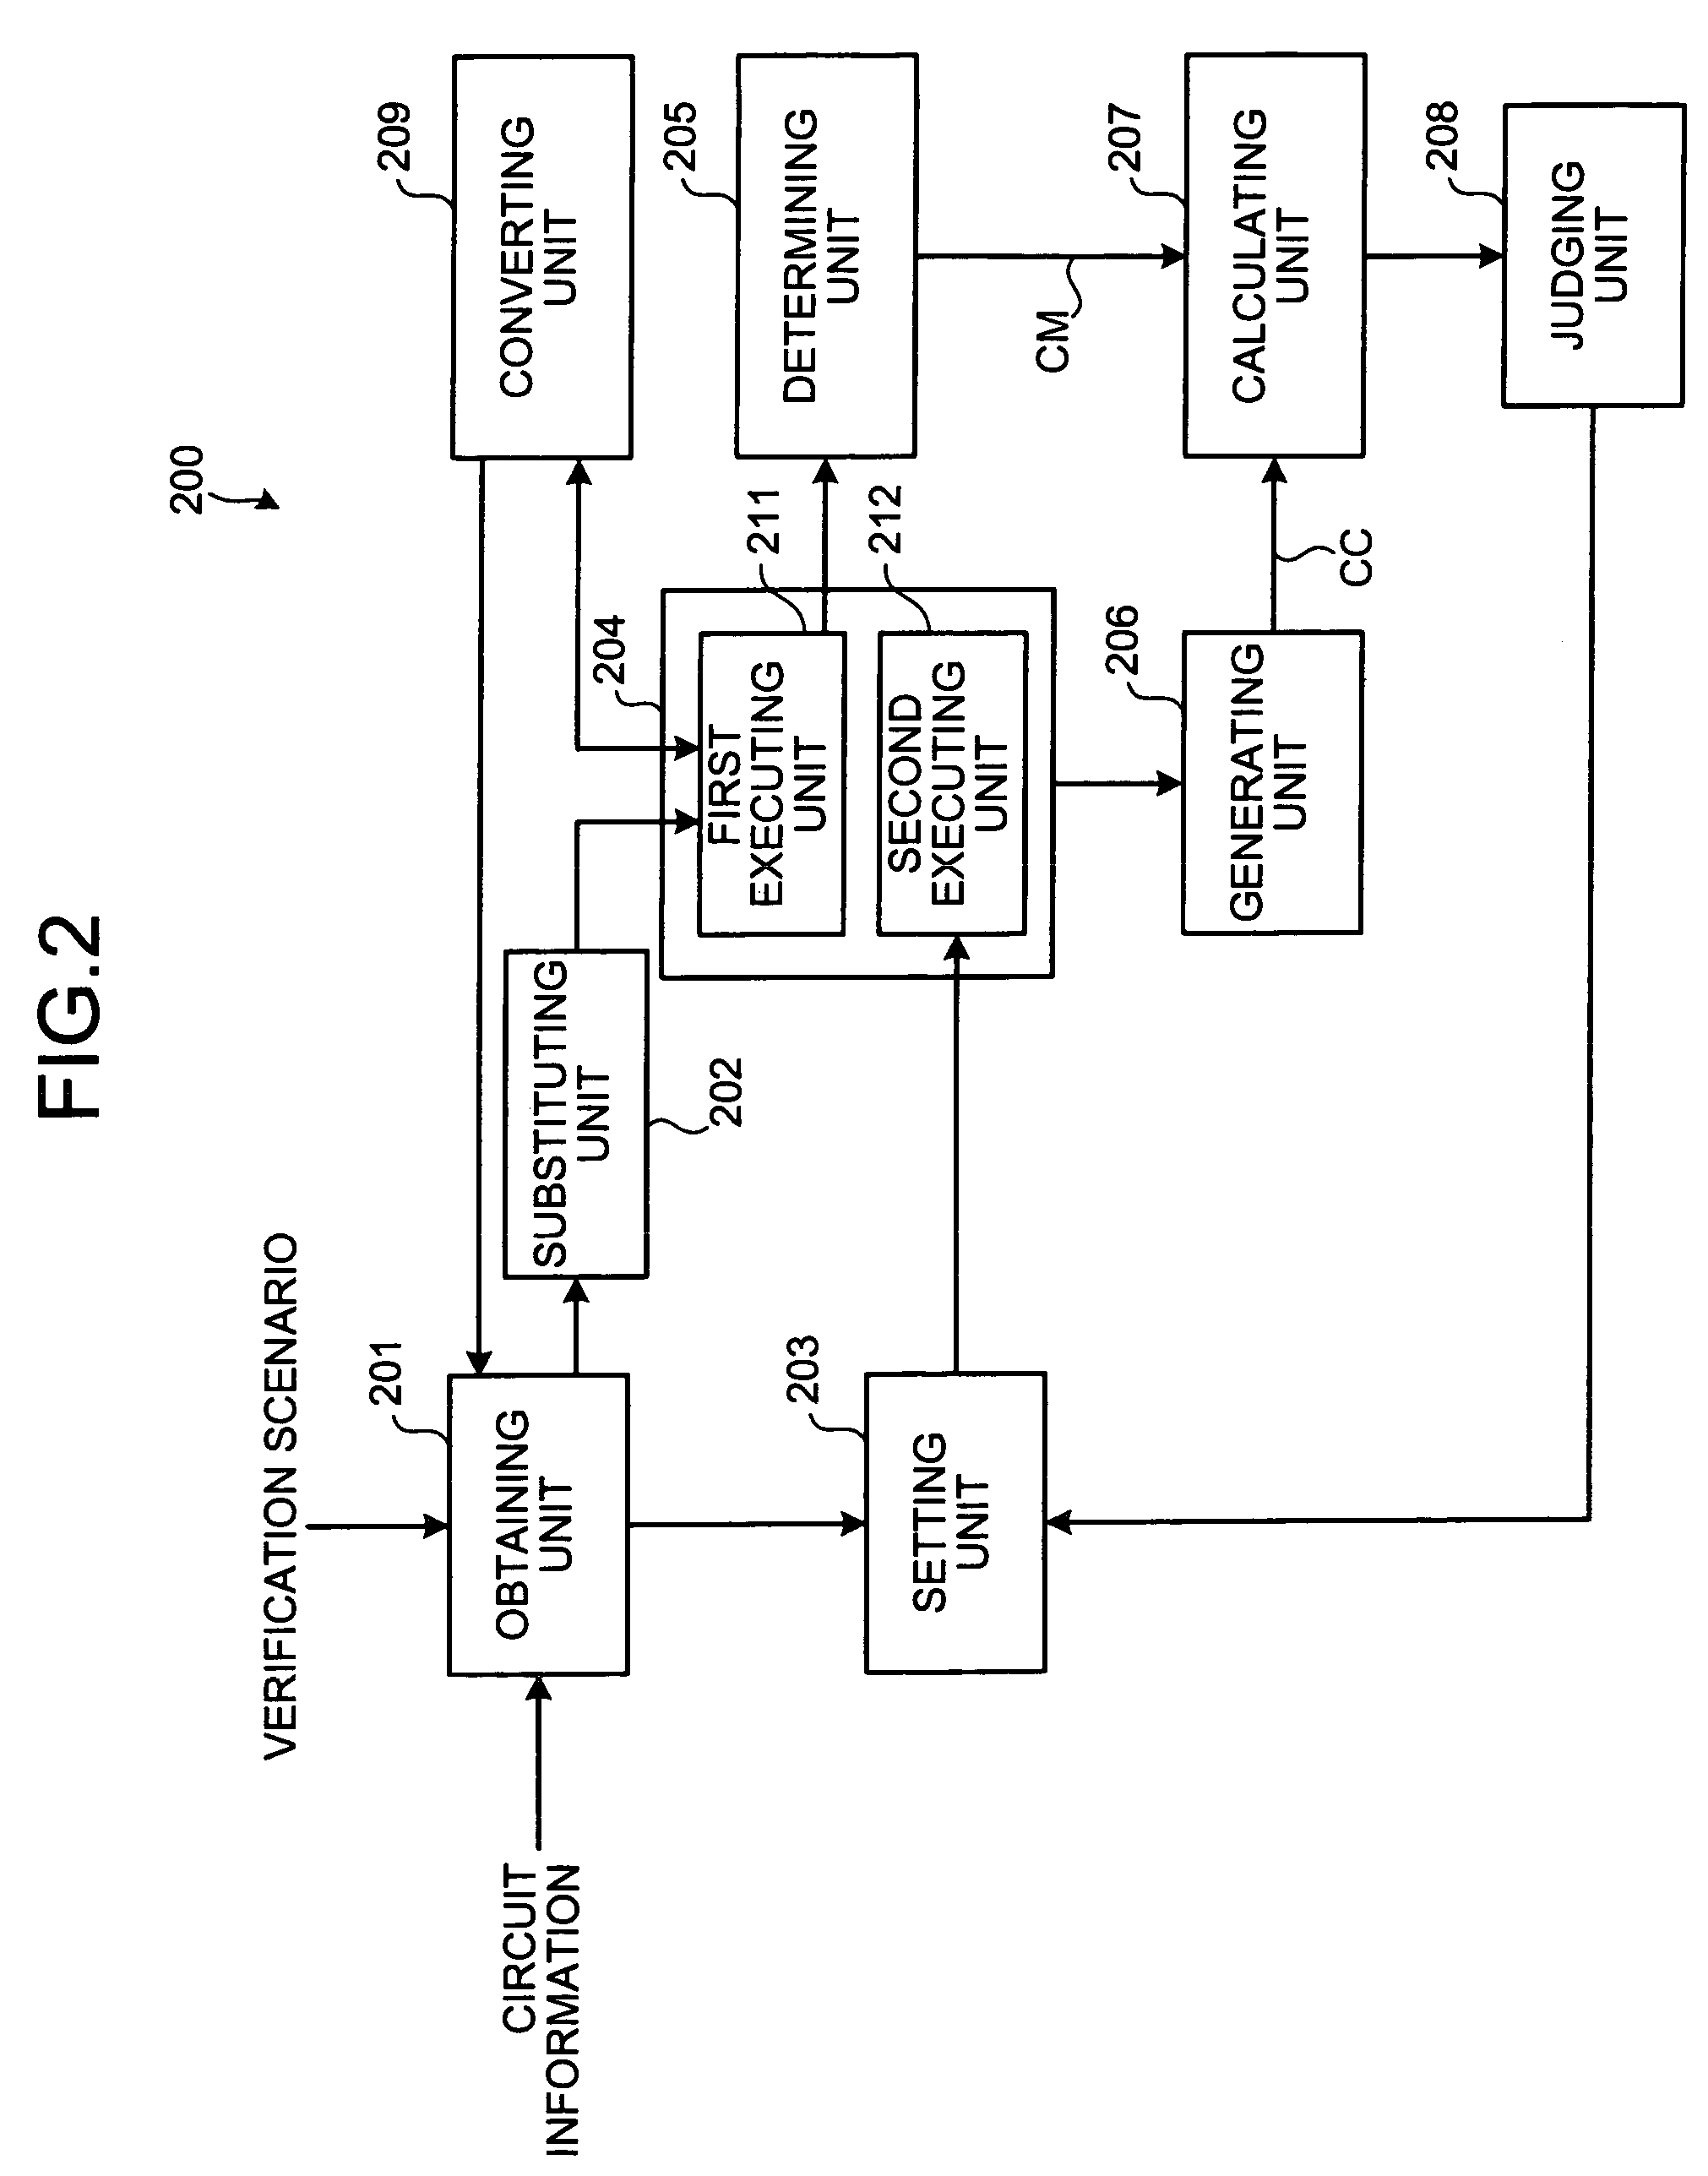 Method and apparatus for supporting verification, and computer product